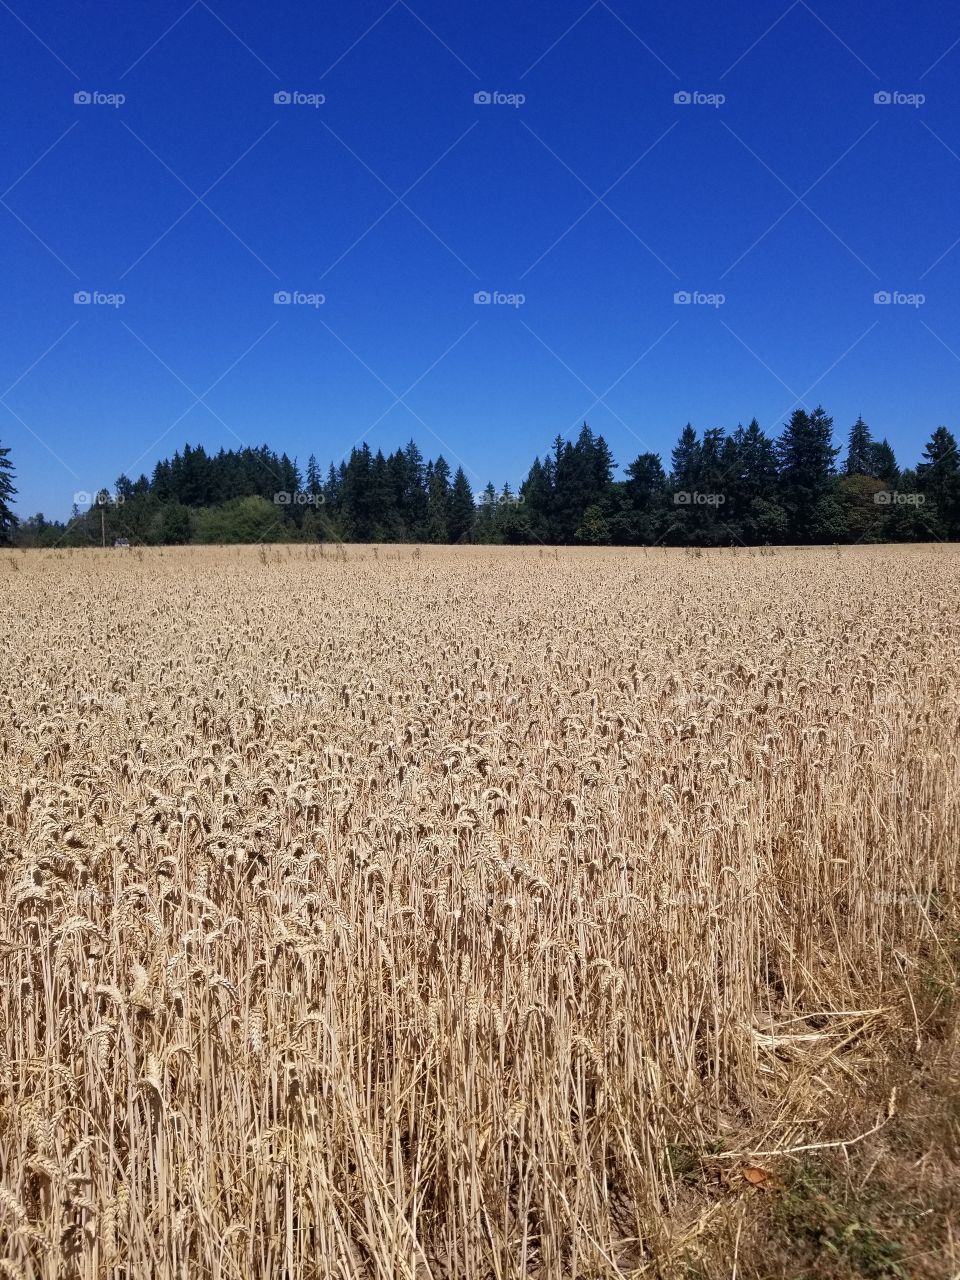 On the edge of the wheat field, extending for miles into the depths of forest, reaching above, grasping an intense blue sky